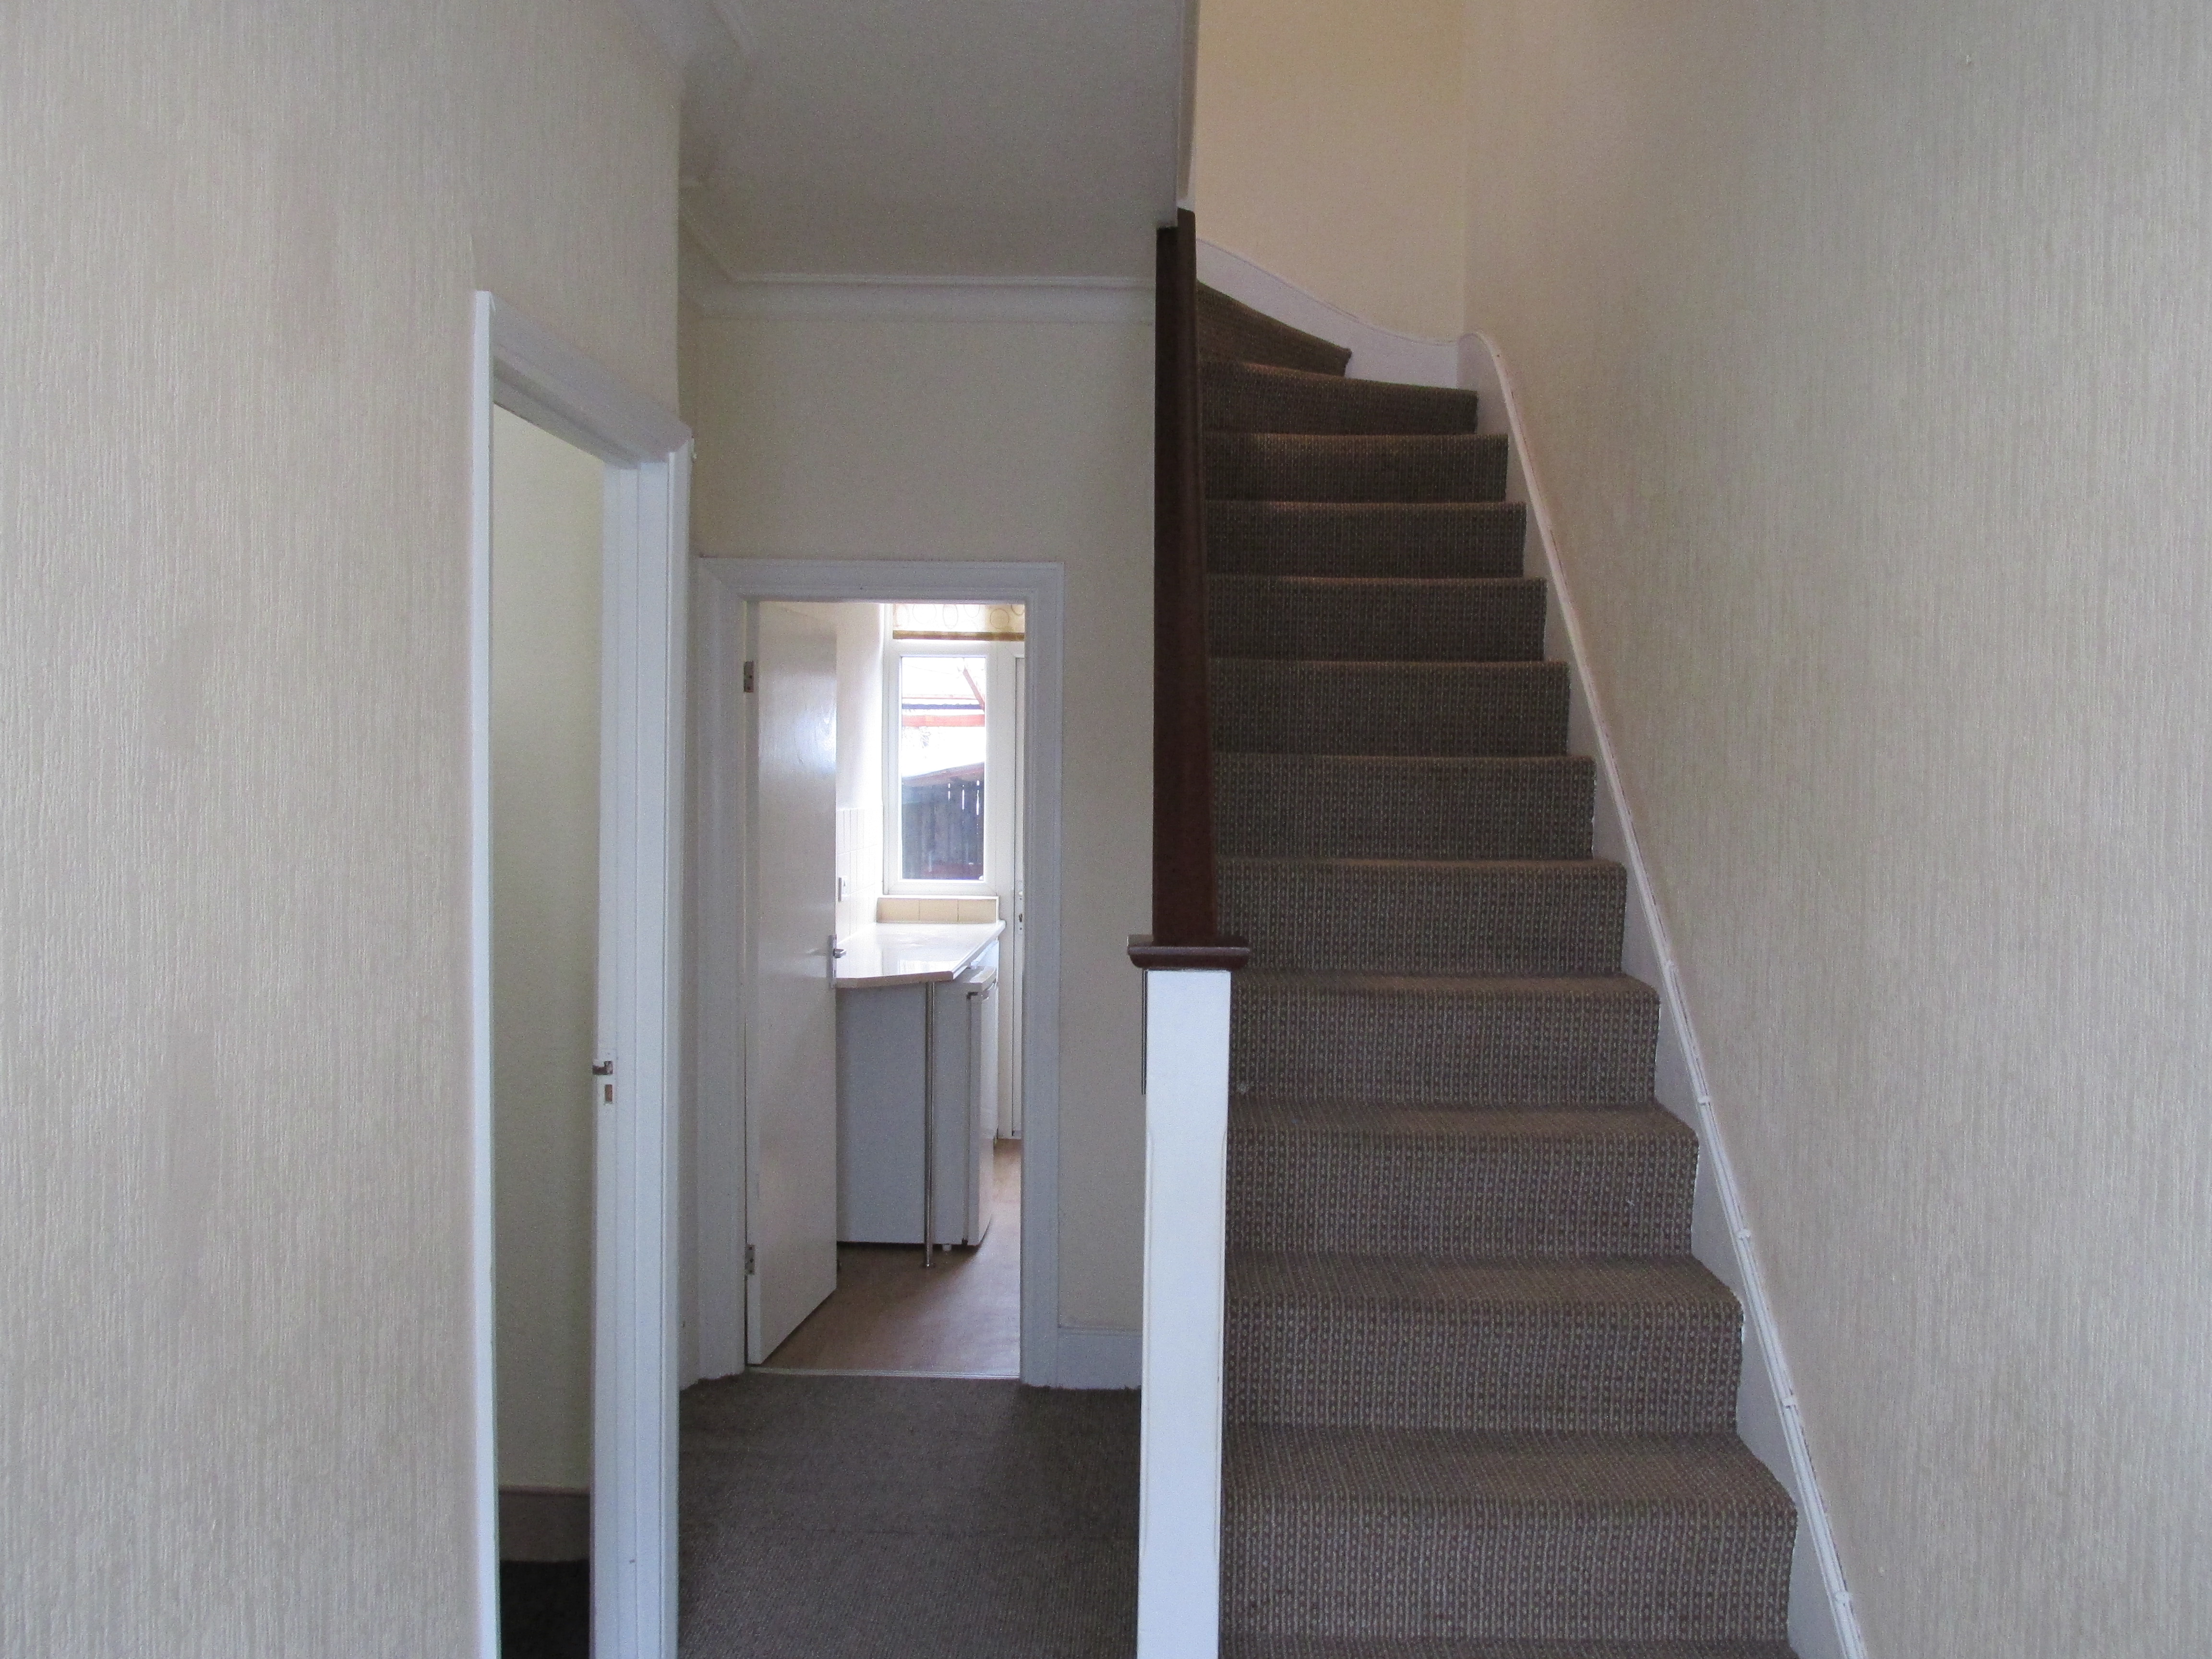 Spacious 3/4 bedroom terraced house to let Tottenham N17. DSS considered.